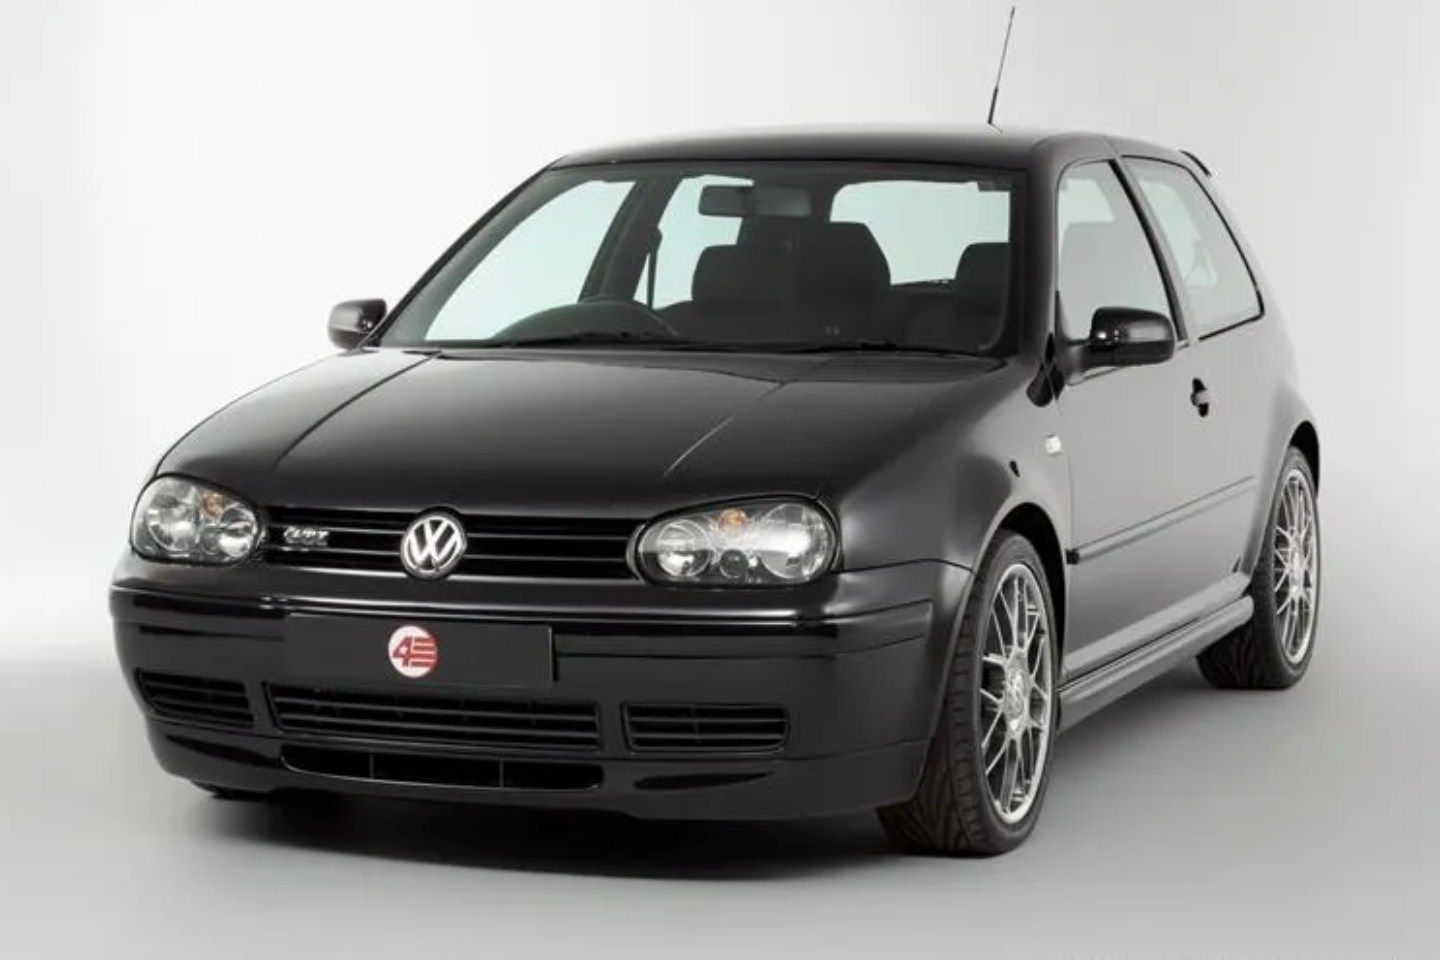 The Golf R “20 Years” is the fastest Volkswagen R ever on the